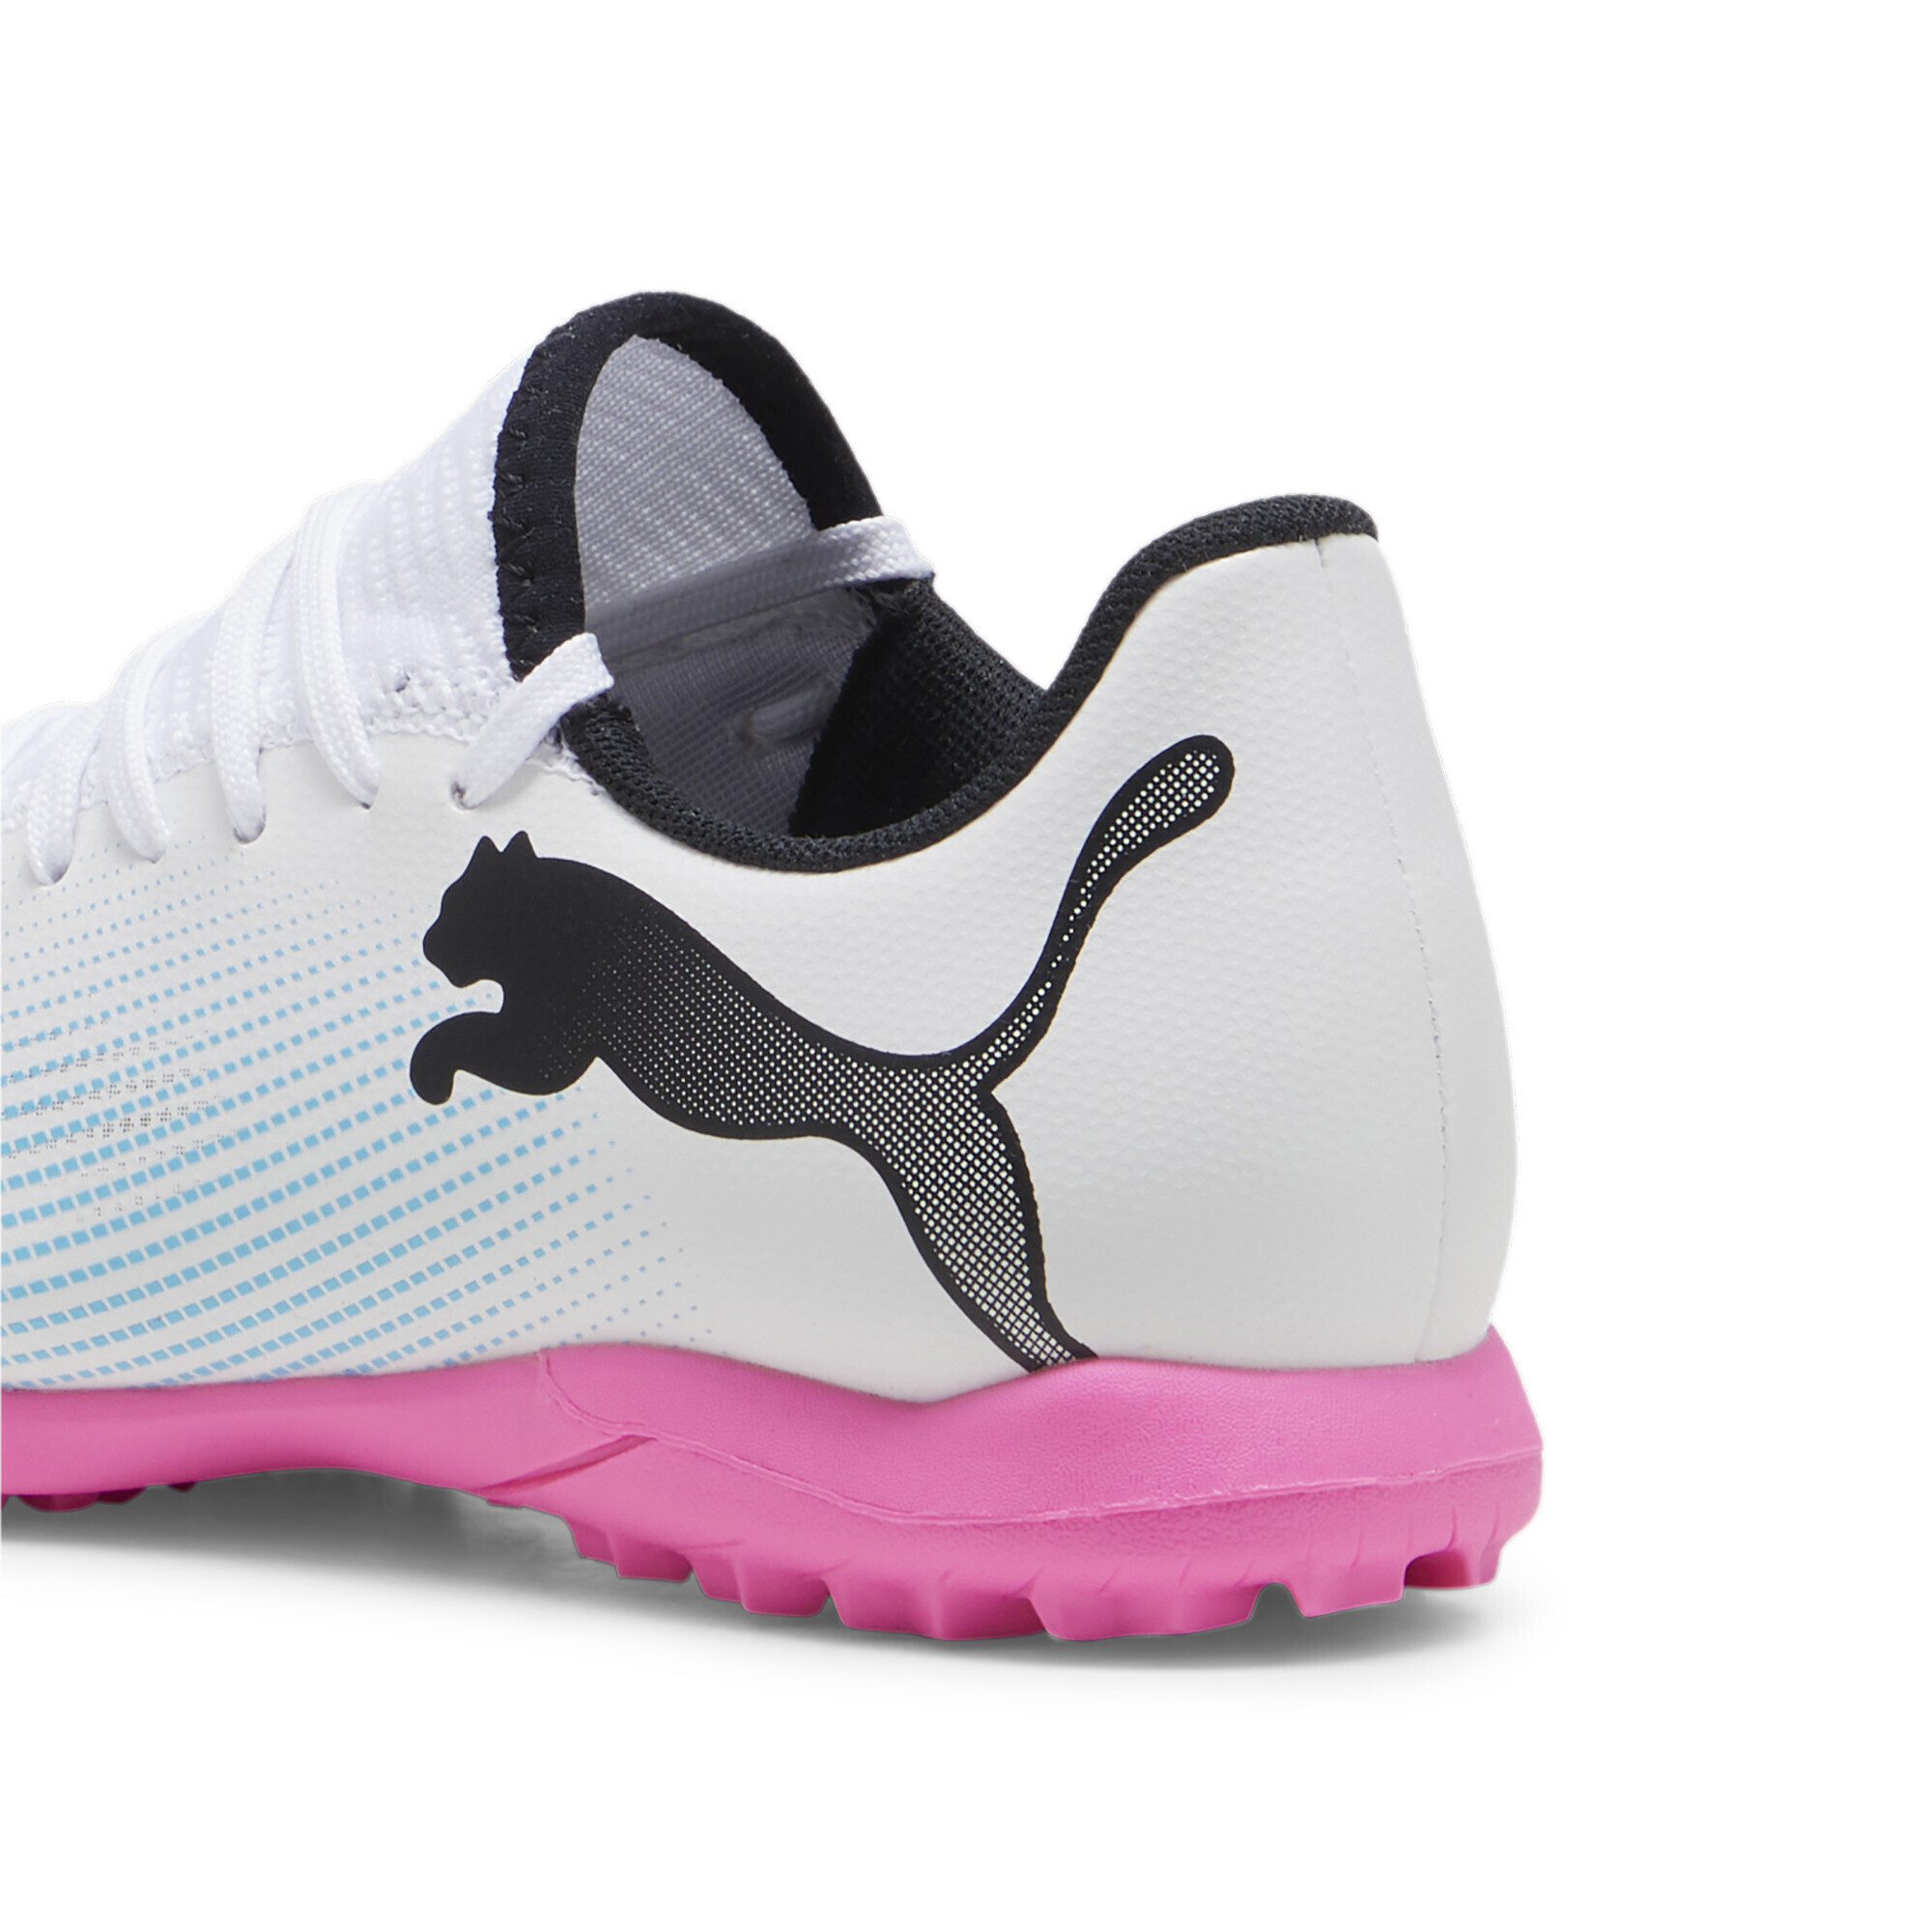 PUMA FUTURE 7 PLAY TT Youth Football Boots In White/Pink, Size EU 35